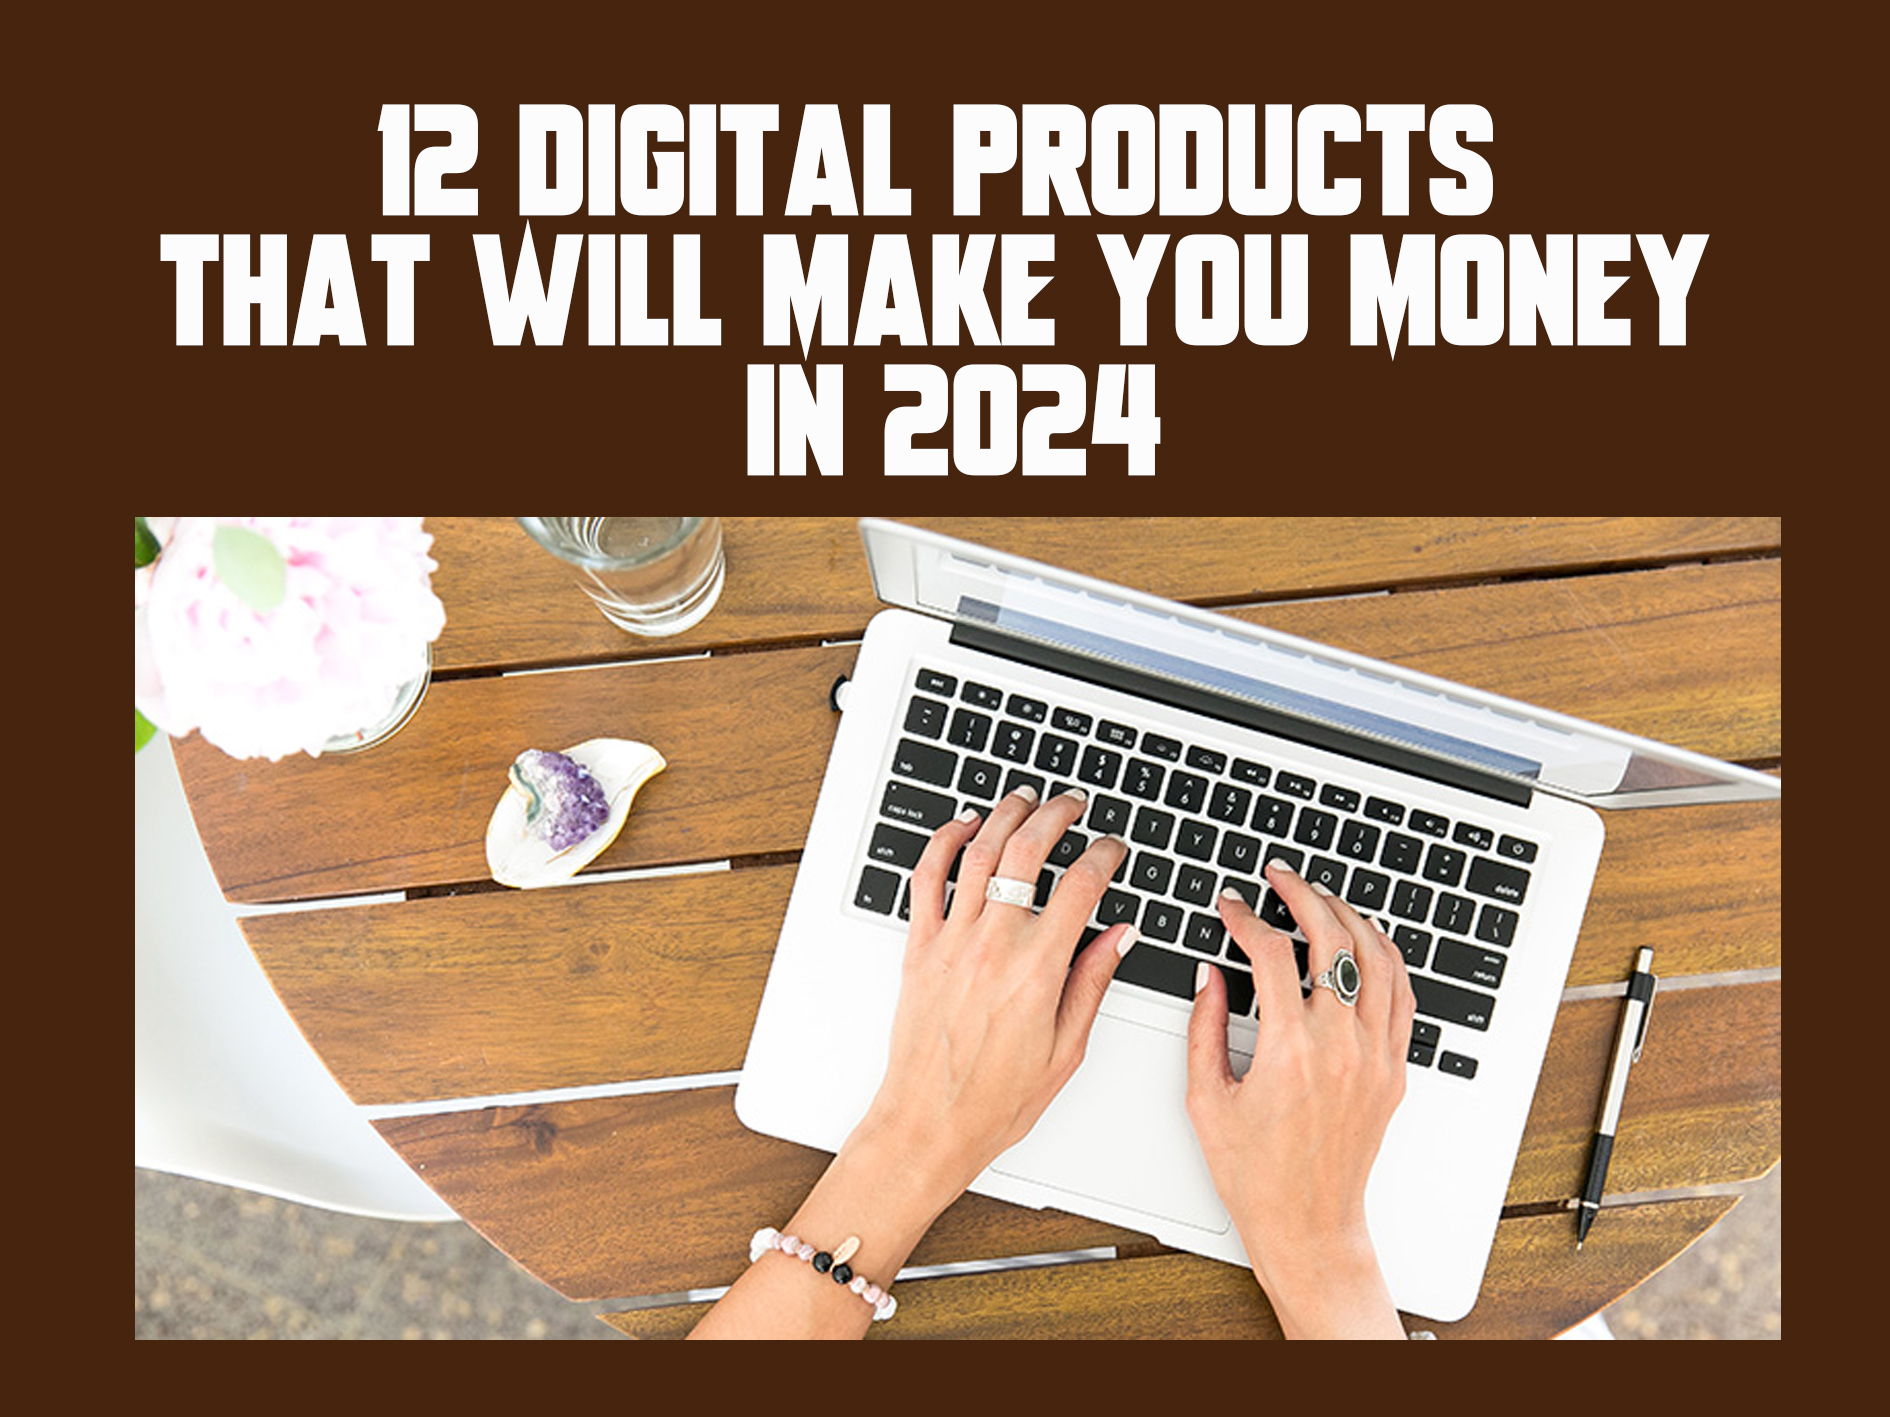 12 Digital Products That Will Make You Money in 2024